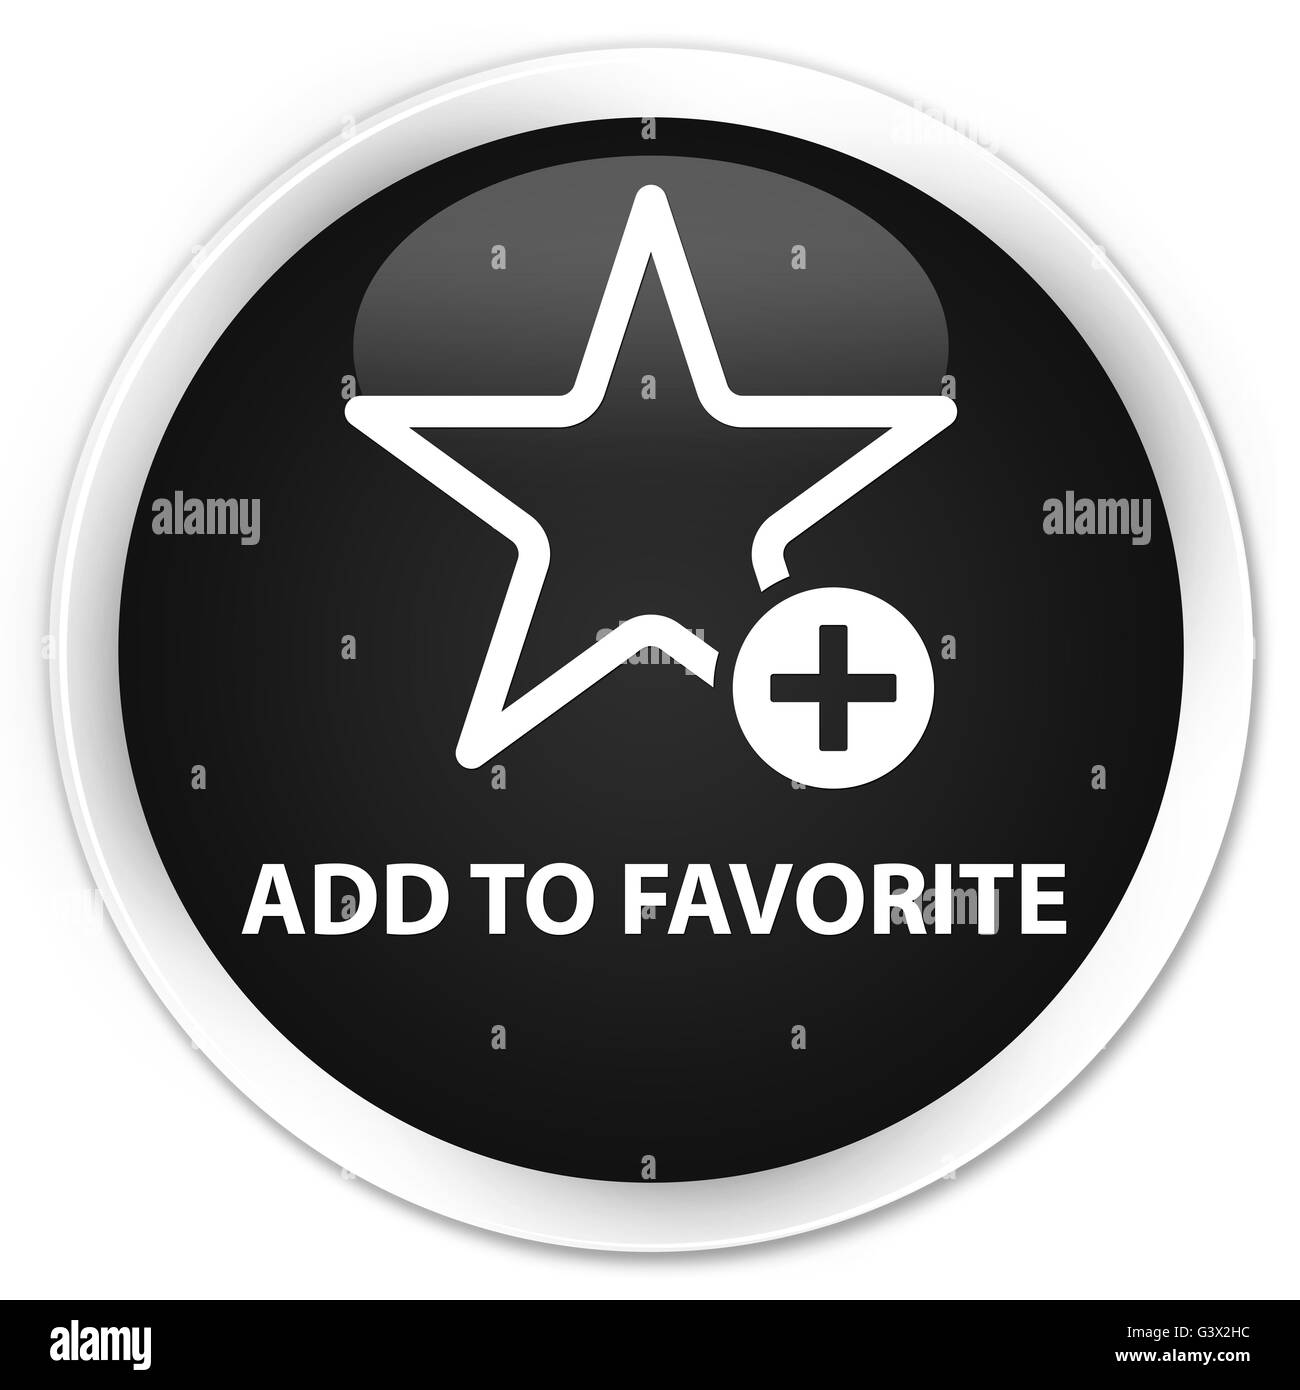 Add to favorite isolated on premium black round button abstract illustration Stock Photo